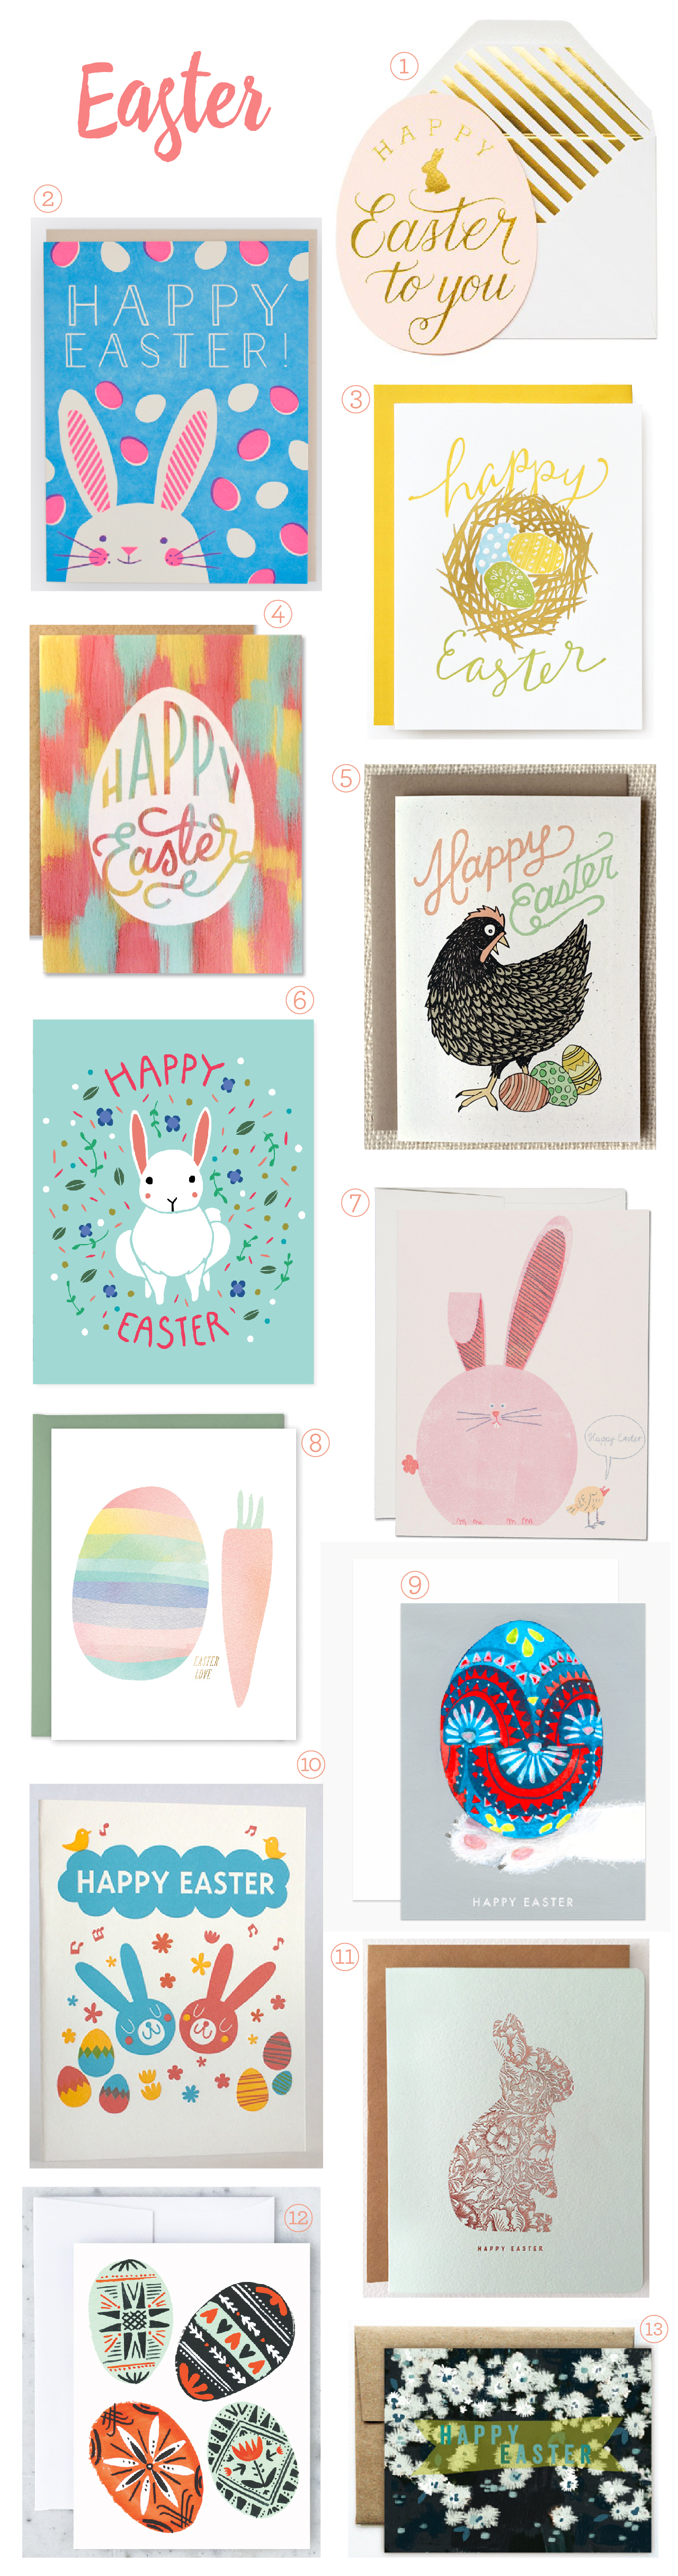 Seasonal Stationery: Easter Card Round Up